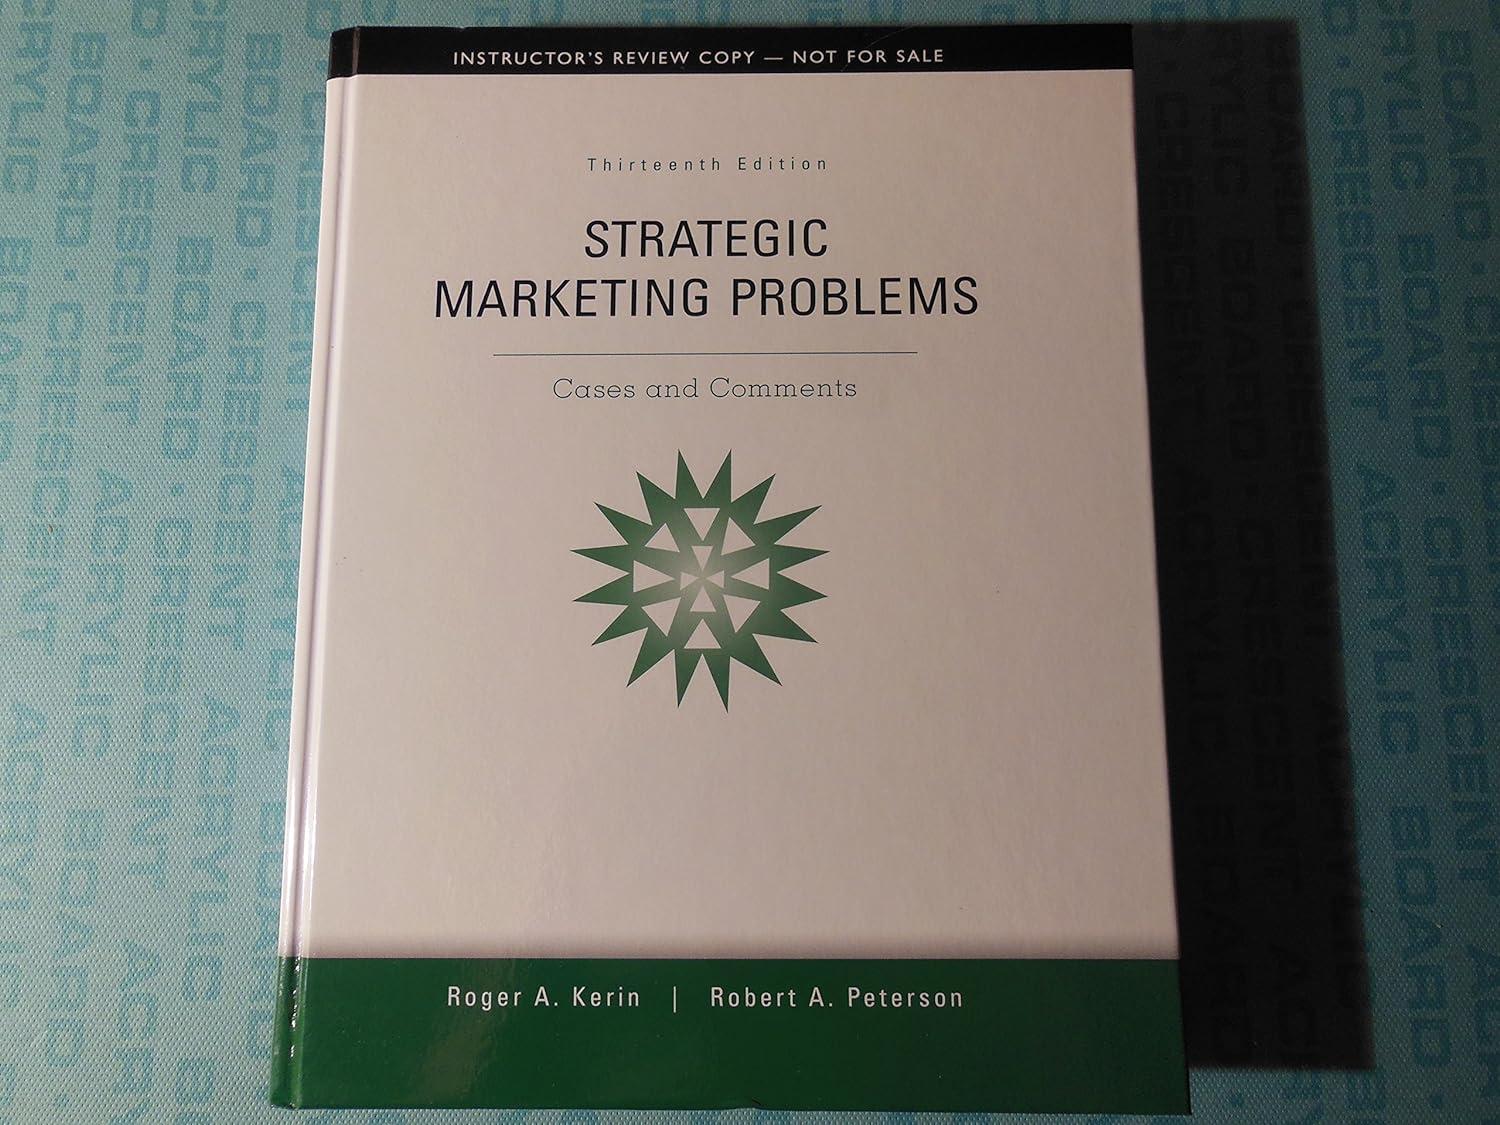 strategic marketing problems cases and comments 13th edition roger a. kerin , robert a. peterson 0132747251,